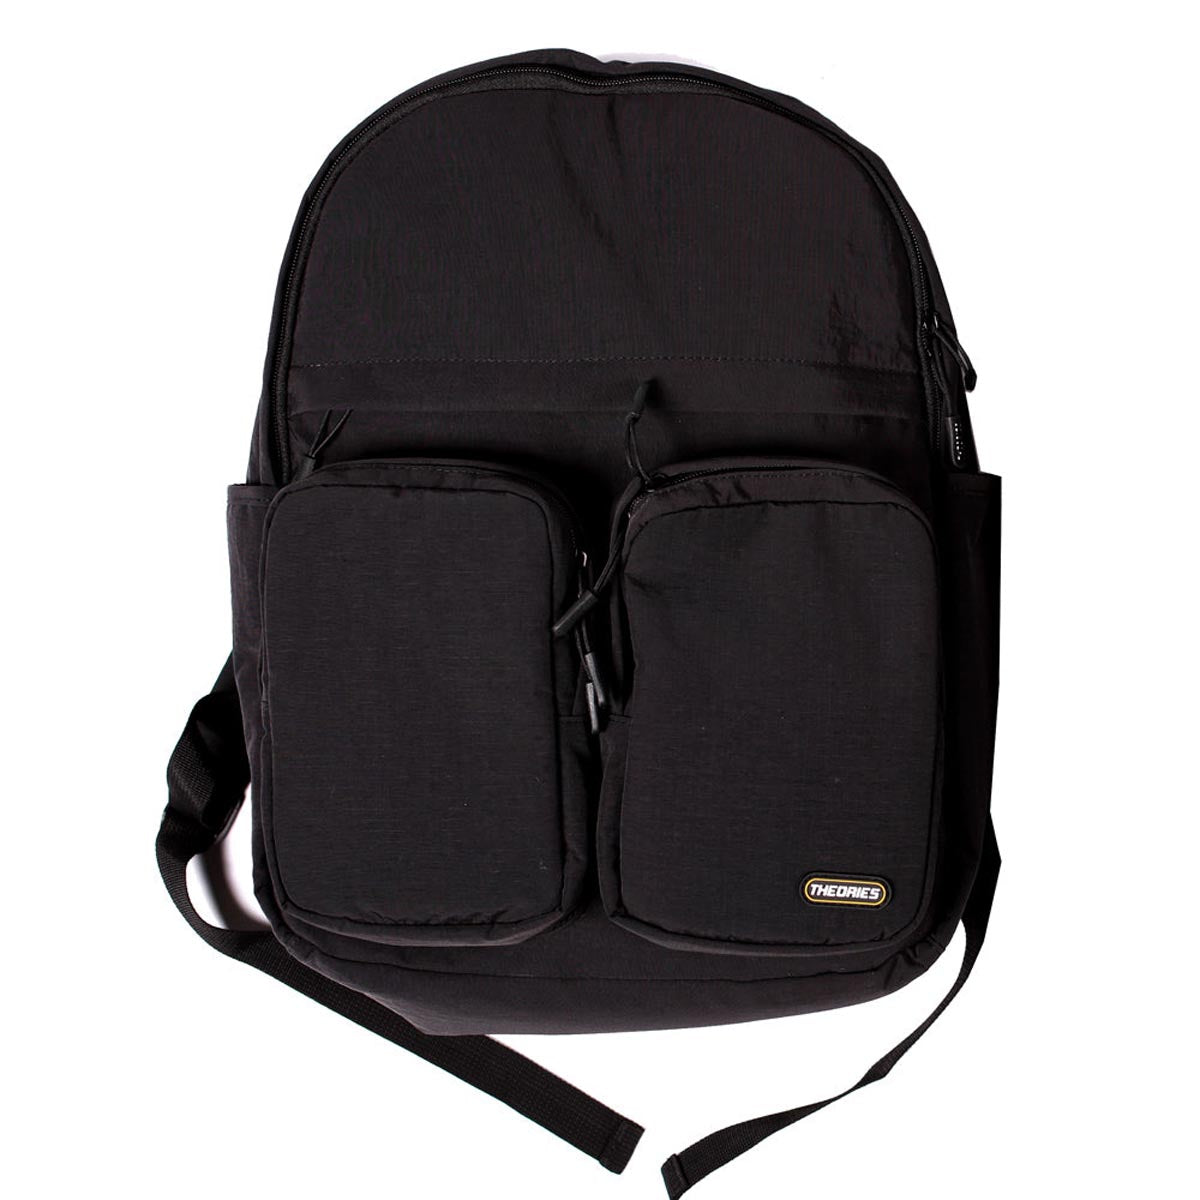 Theories Ripstop Trail Backpack - Black image 1